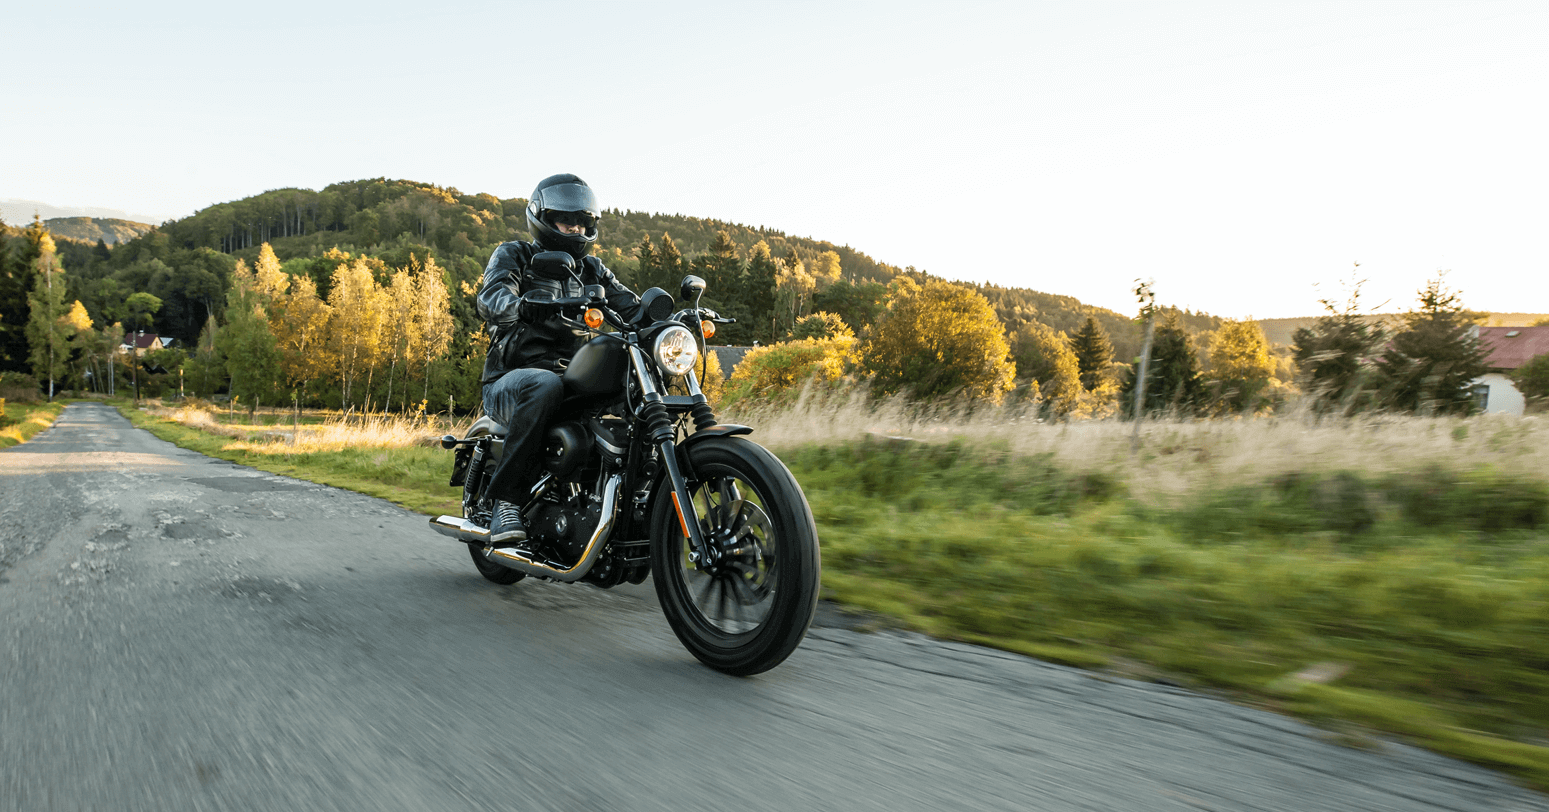 Motorcyclist in black gear enjoying a ride on a country road at dusk